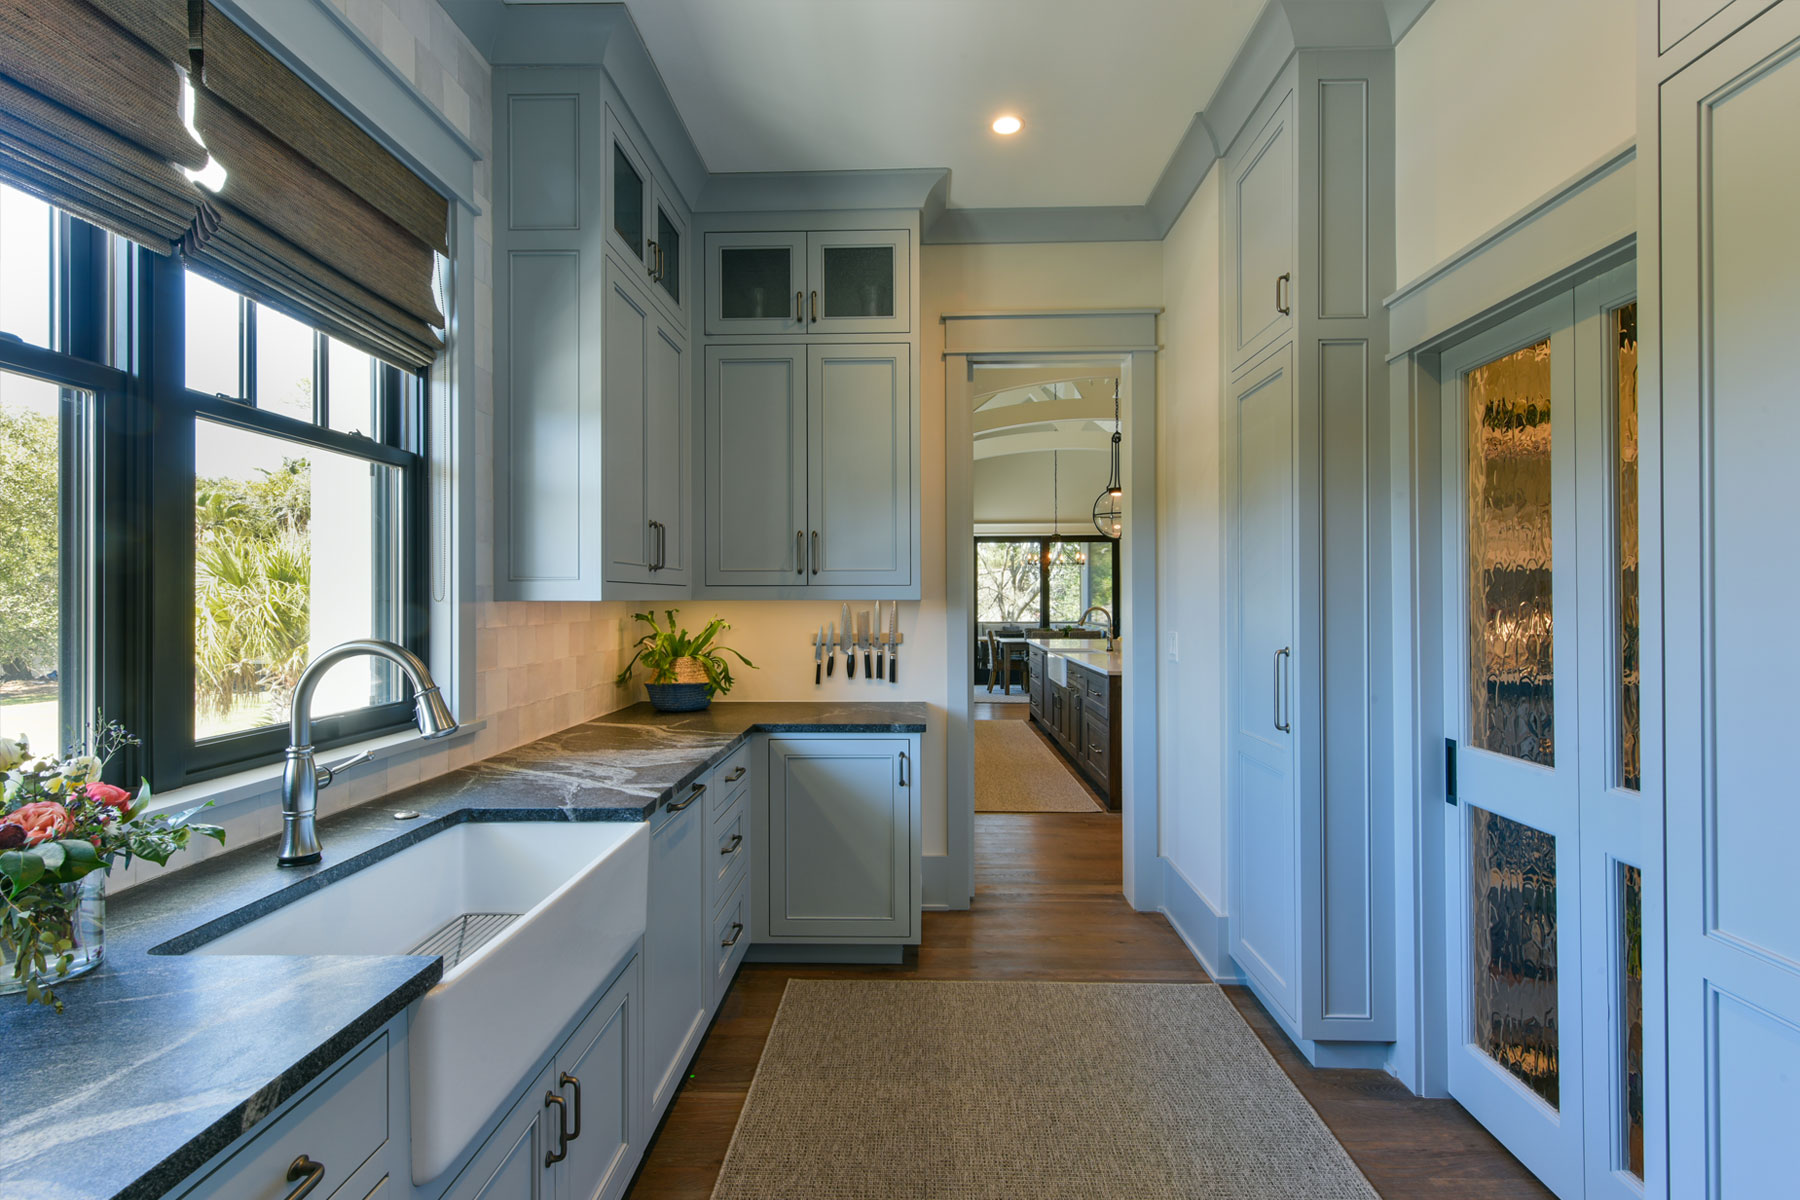 Butler's kitchen in luxury home with light blue painted custom cabinets and walk in pantry. View back to kitchen.